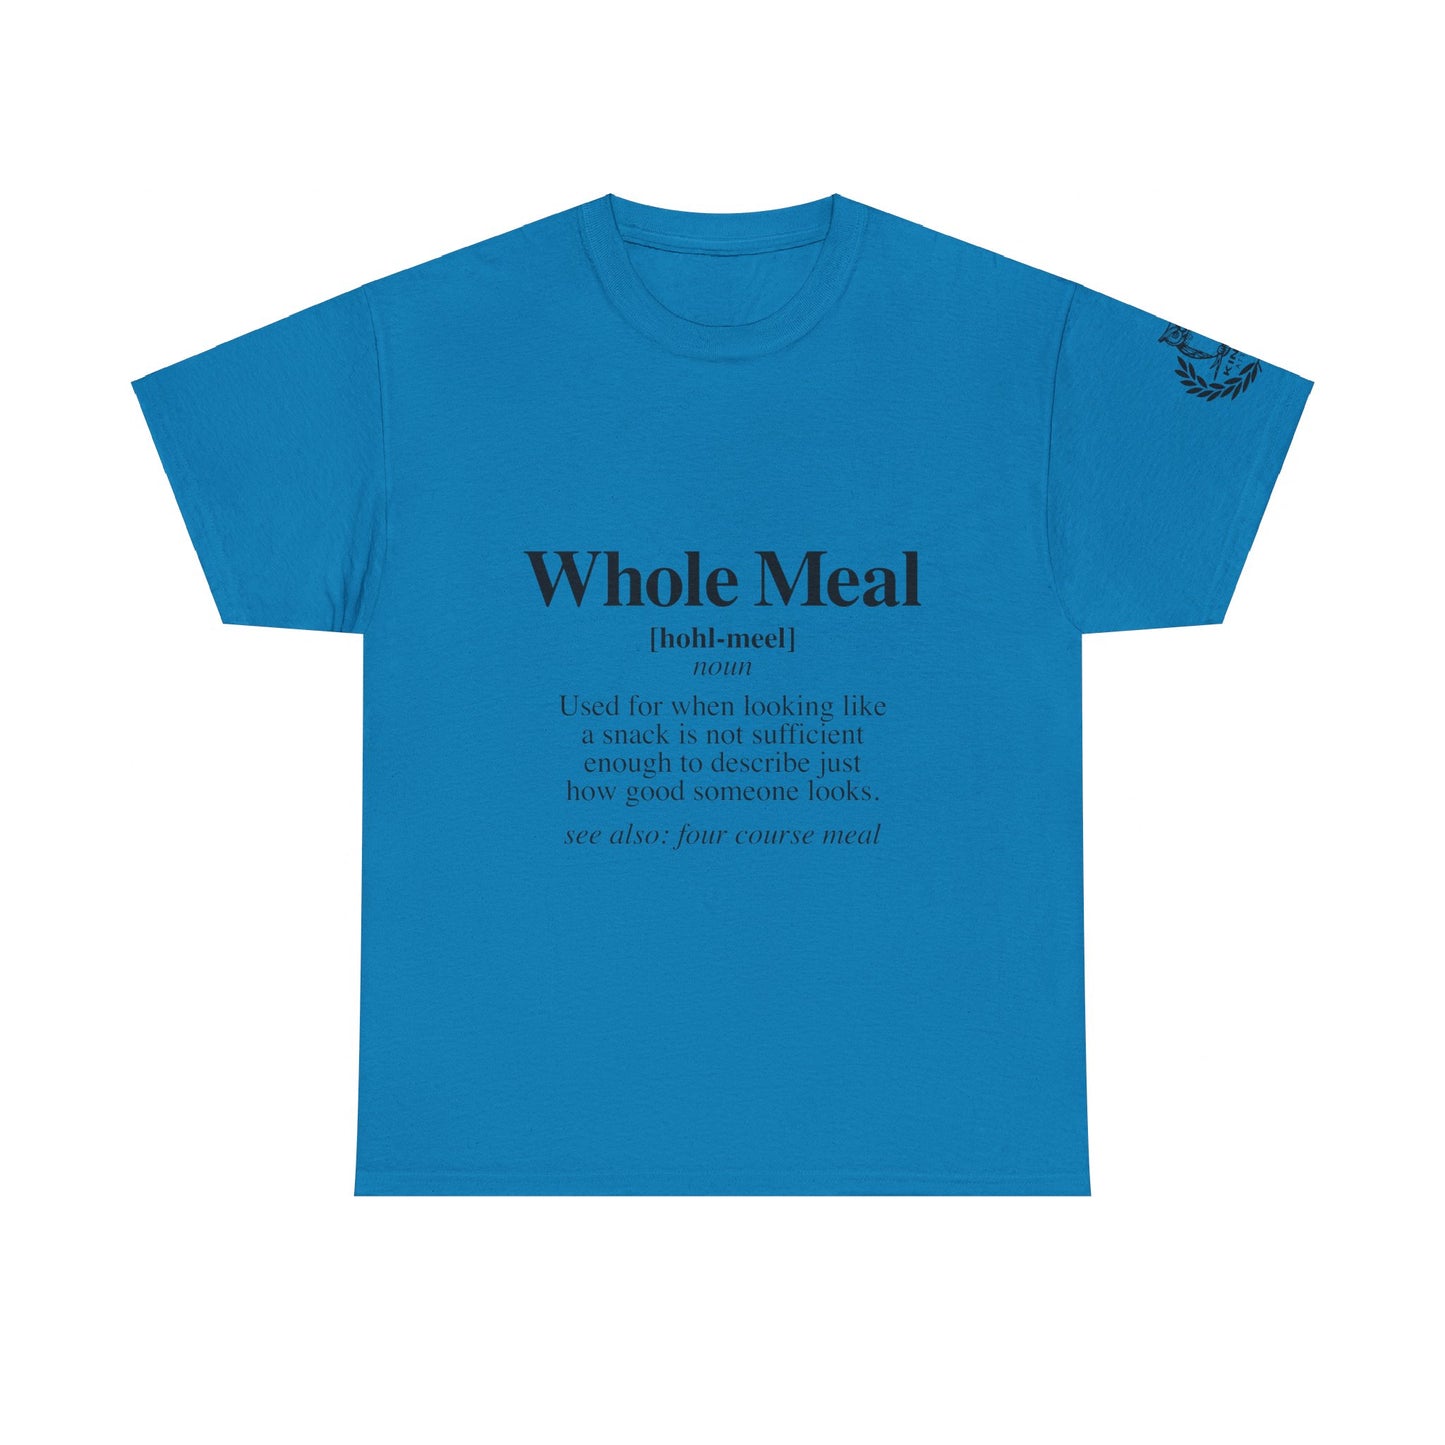 Kings Attire- Whole Meal